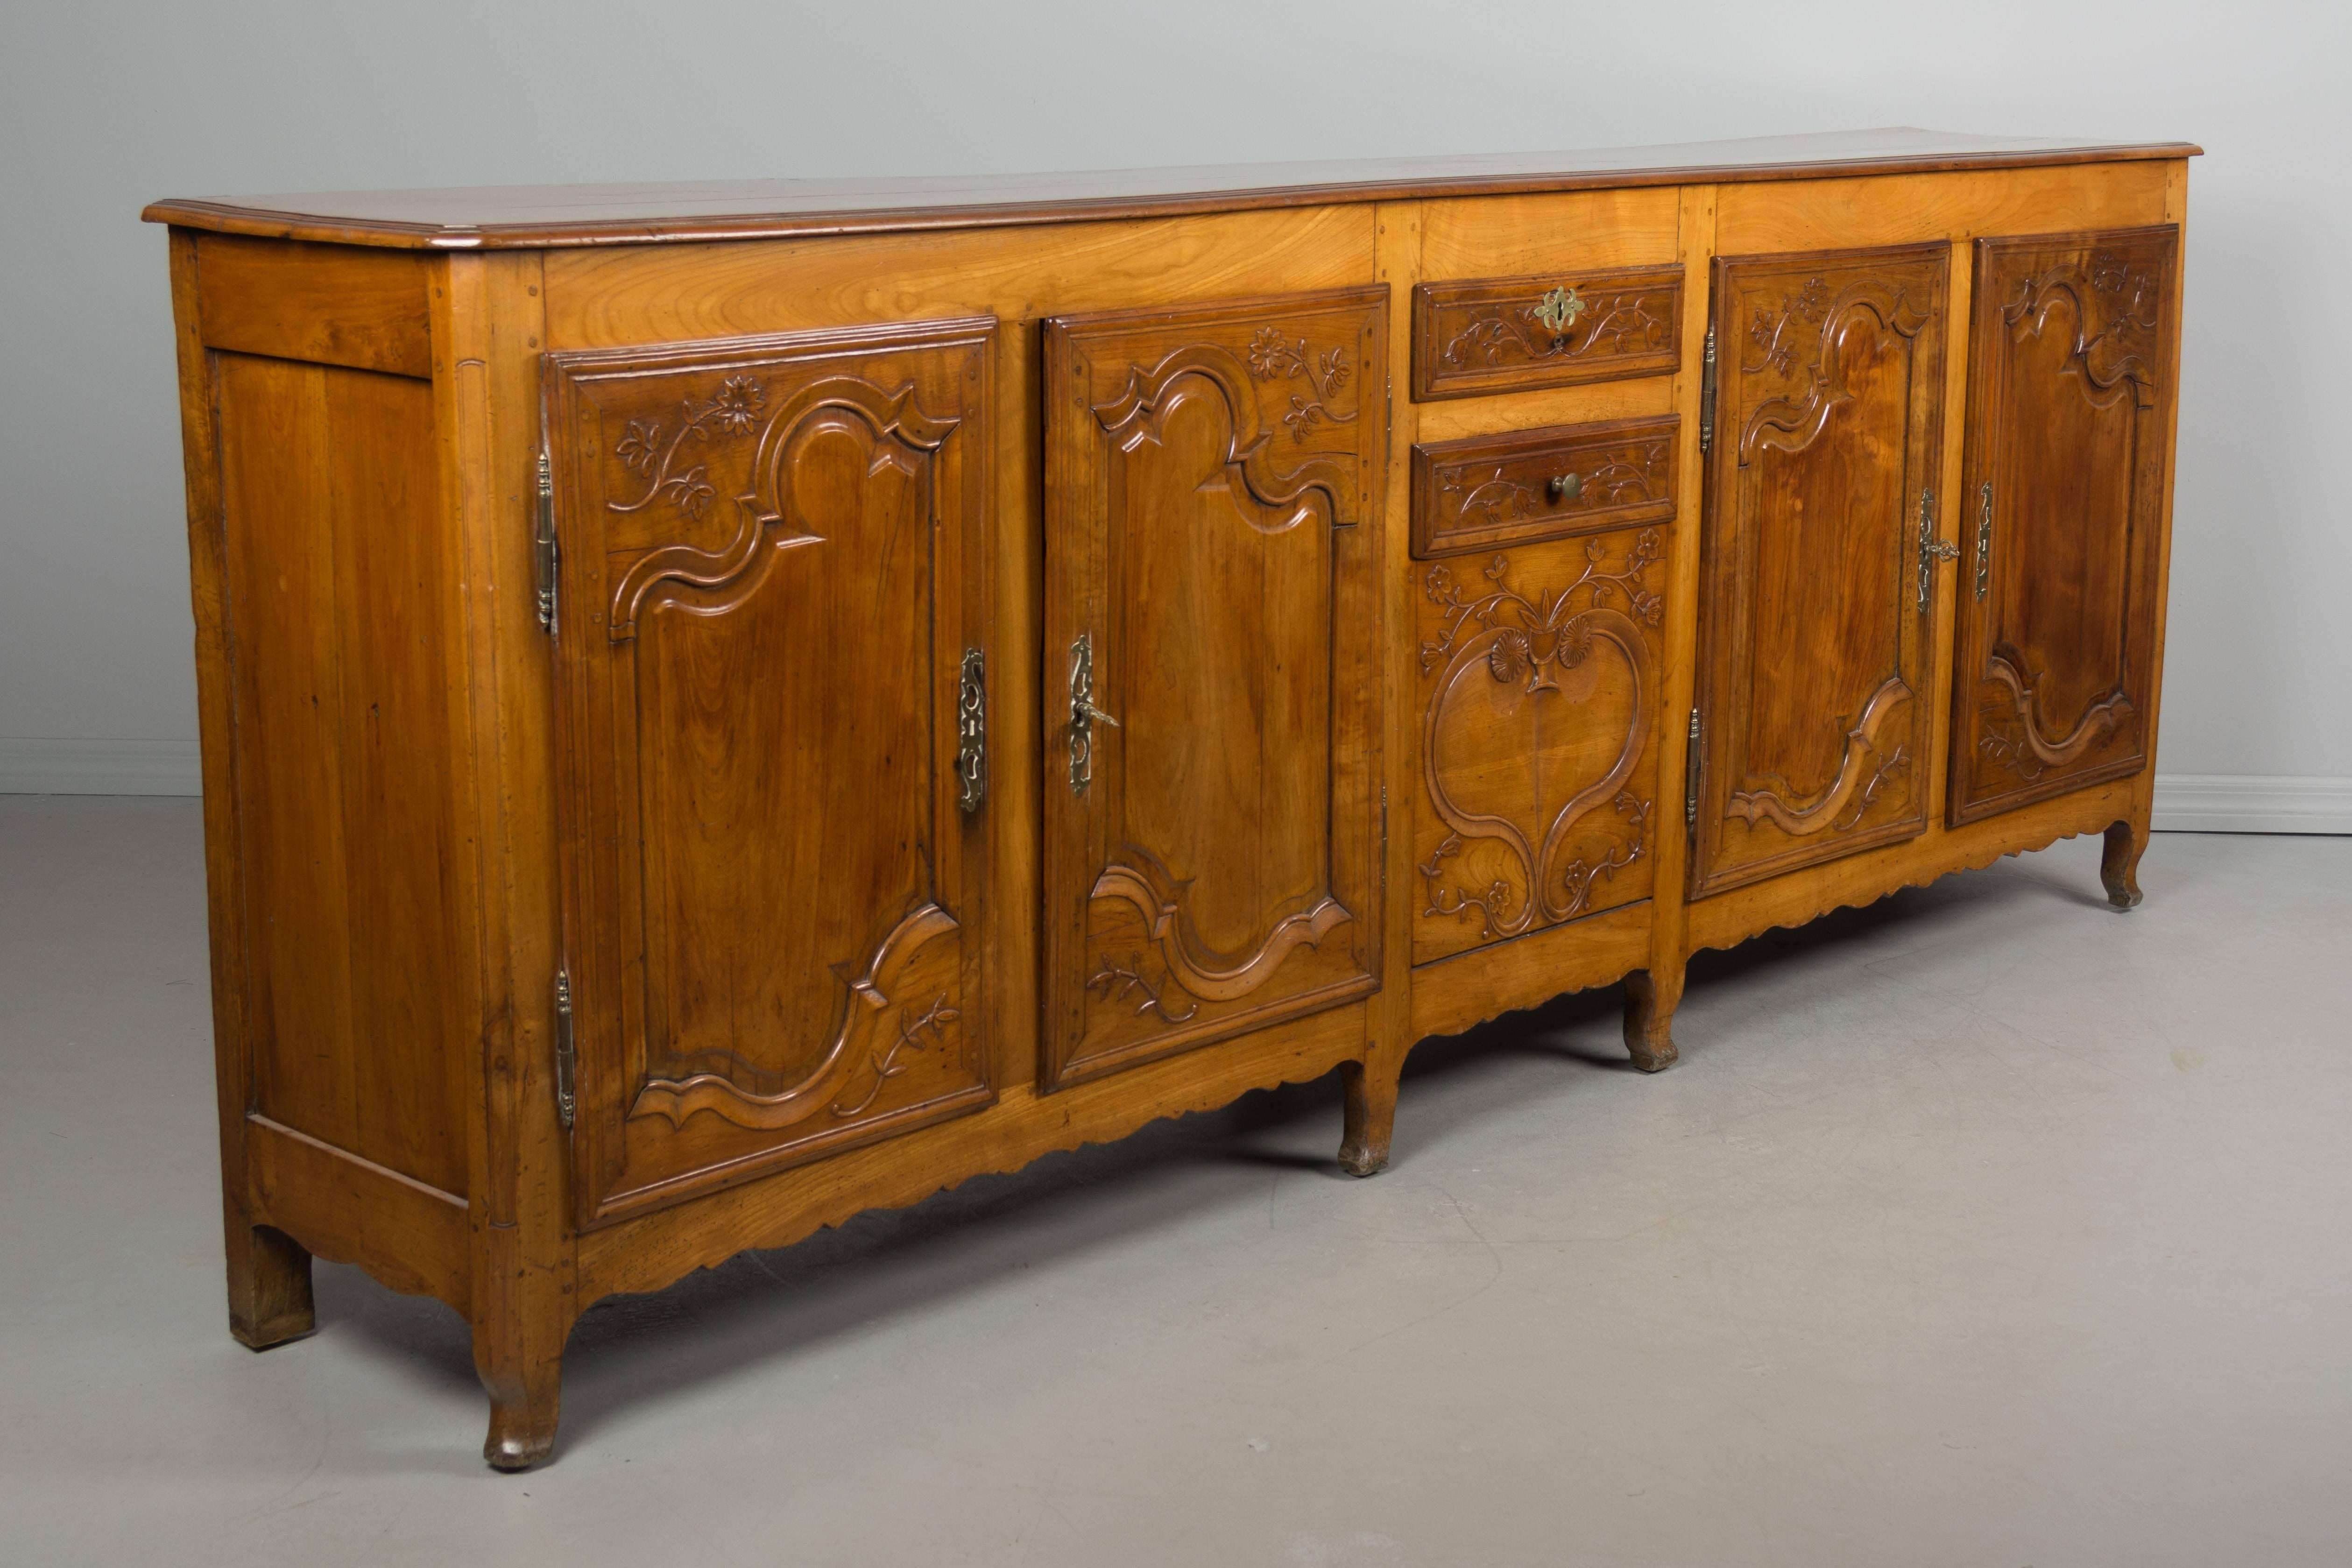 A large 19th century Louis XV enfilade, or sideboard, from Picardie in the North of France. Made of solid cherrywood with fine hand carvings. Ample storage, with doors on the left opening to two interior shelves and the doors on the right opening to